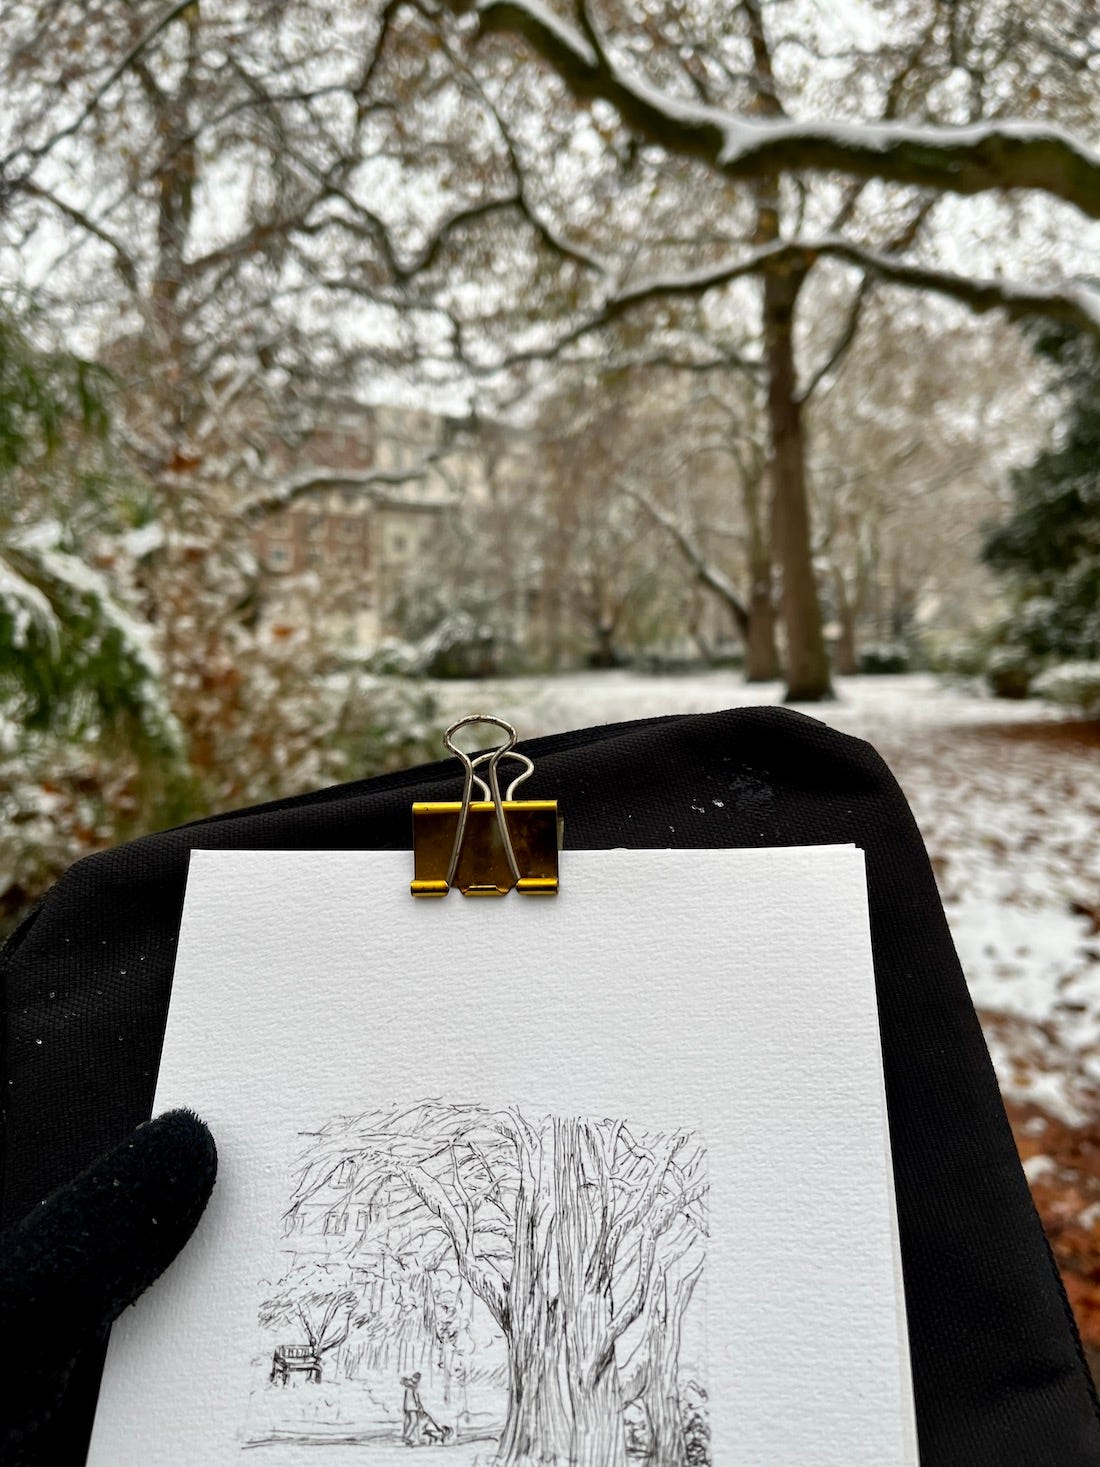 Image: Line drawing of a snowy, wintry scene at a park in London. The trees are seen in the middle ground and foreground, with their branches covered in snow. In the background, a man wearing a winter jacket is walking his dog.